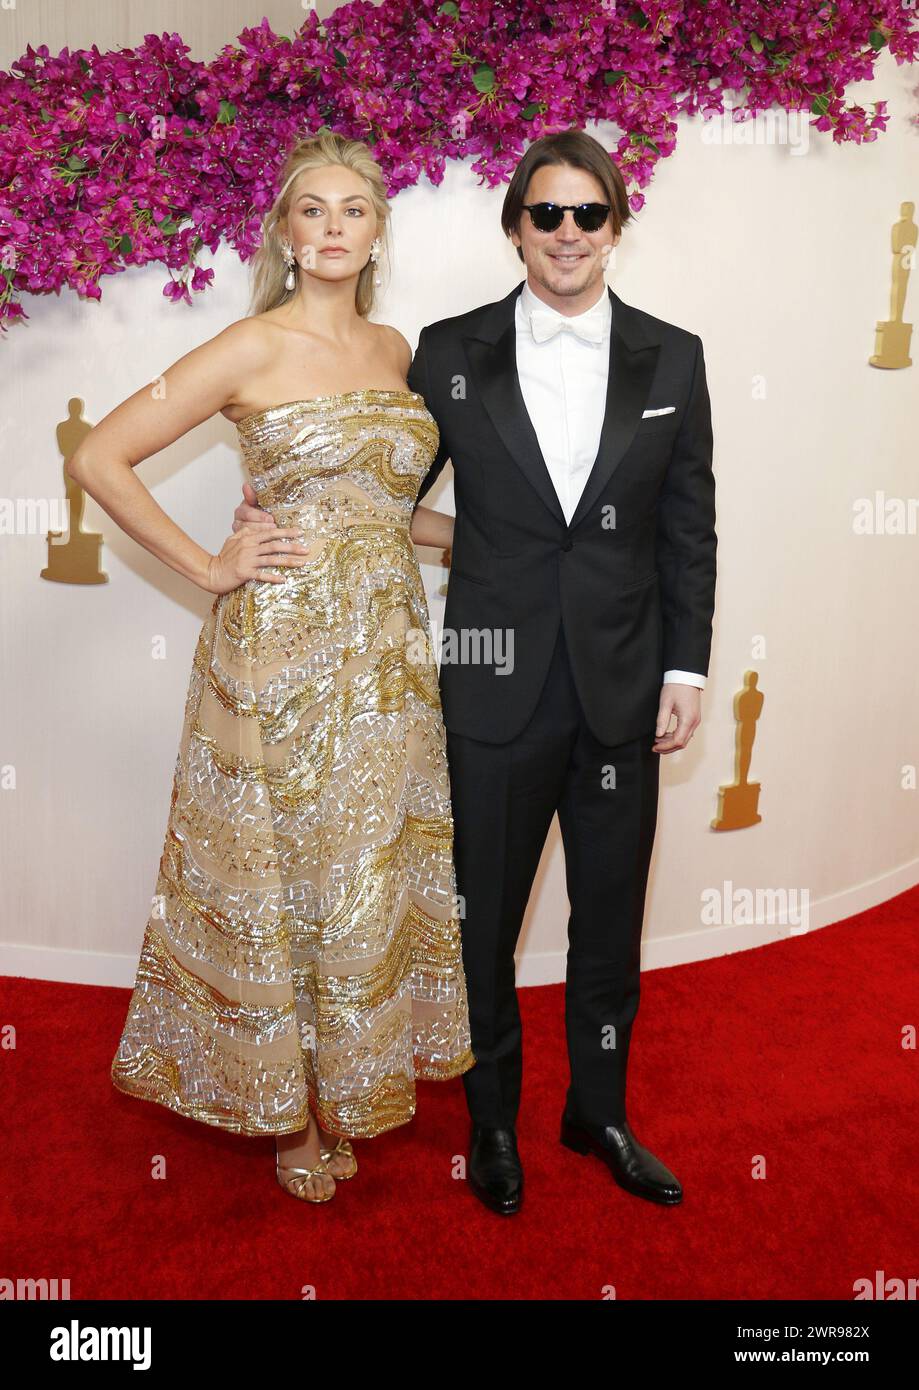 Josh Hartnett and Tamsin Egerton at the 6th Annual Academy Awards held at the Dolby Theater in Hollywood, USA on March 10, 2024. Stock Photo